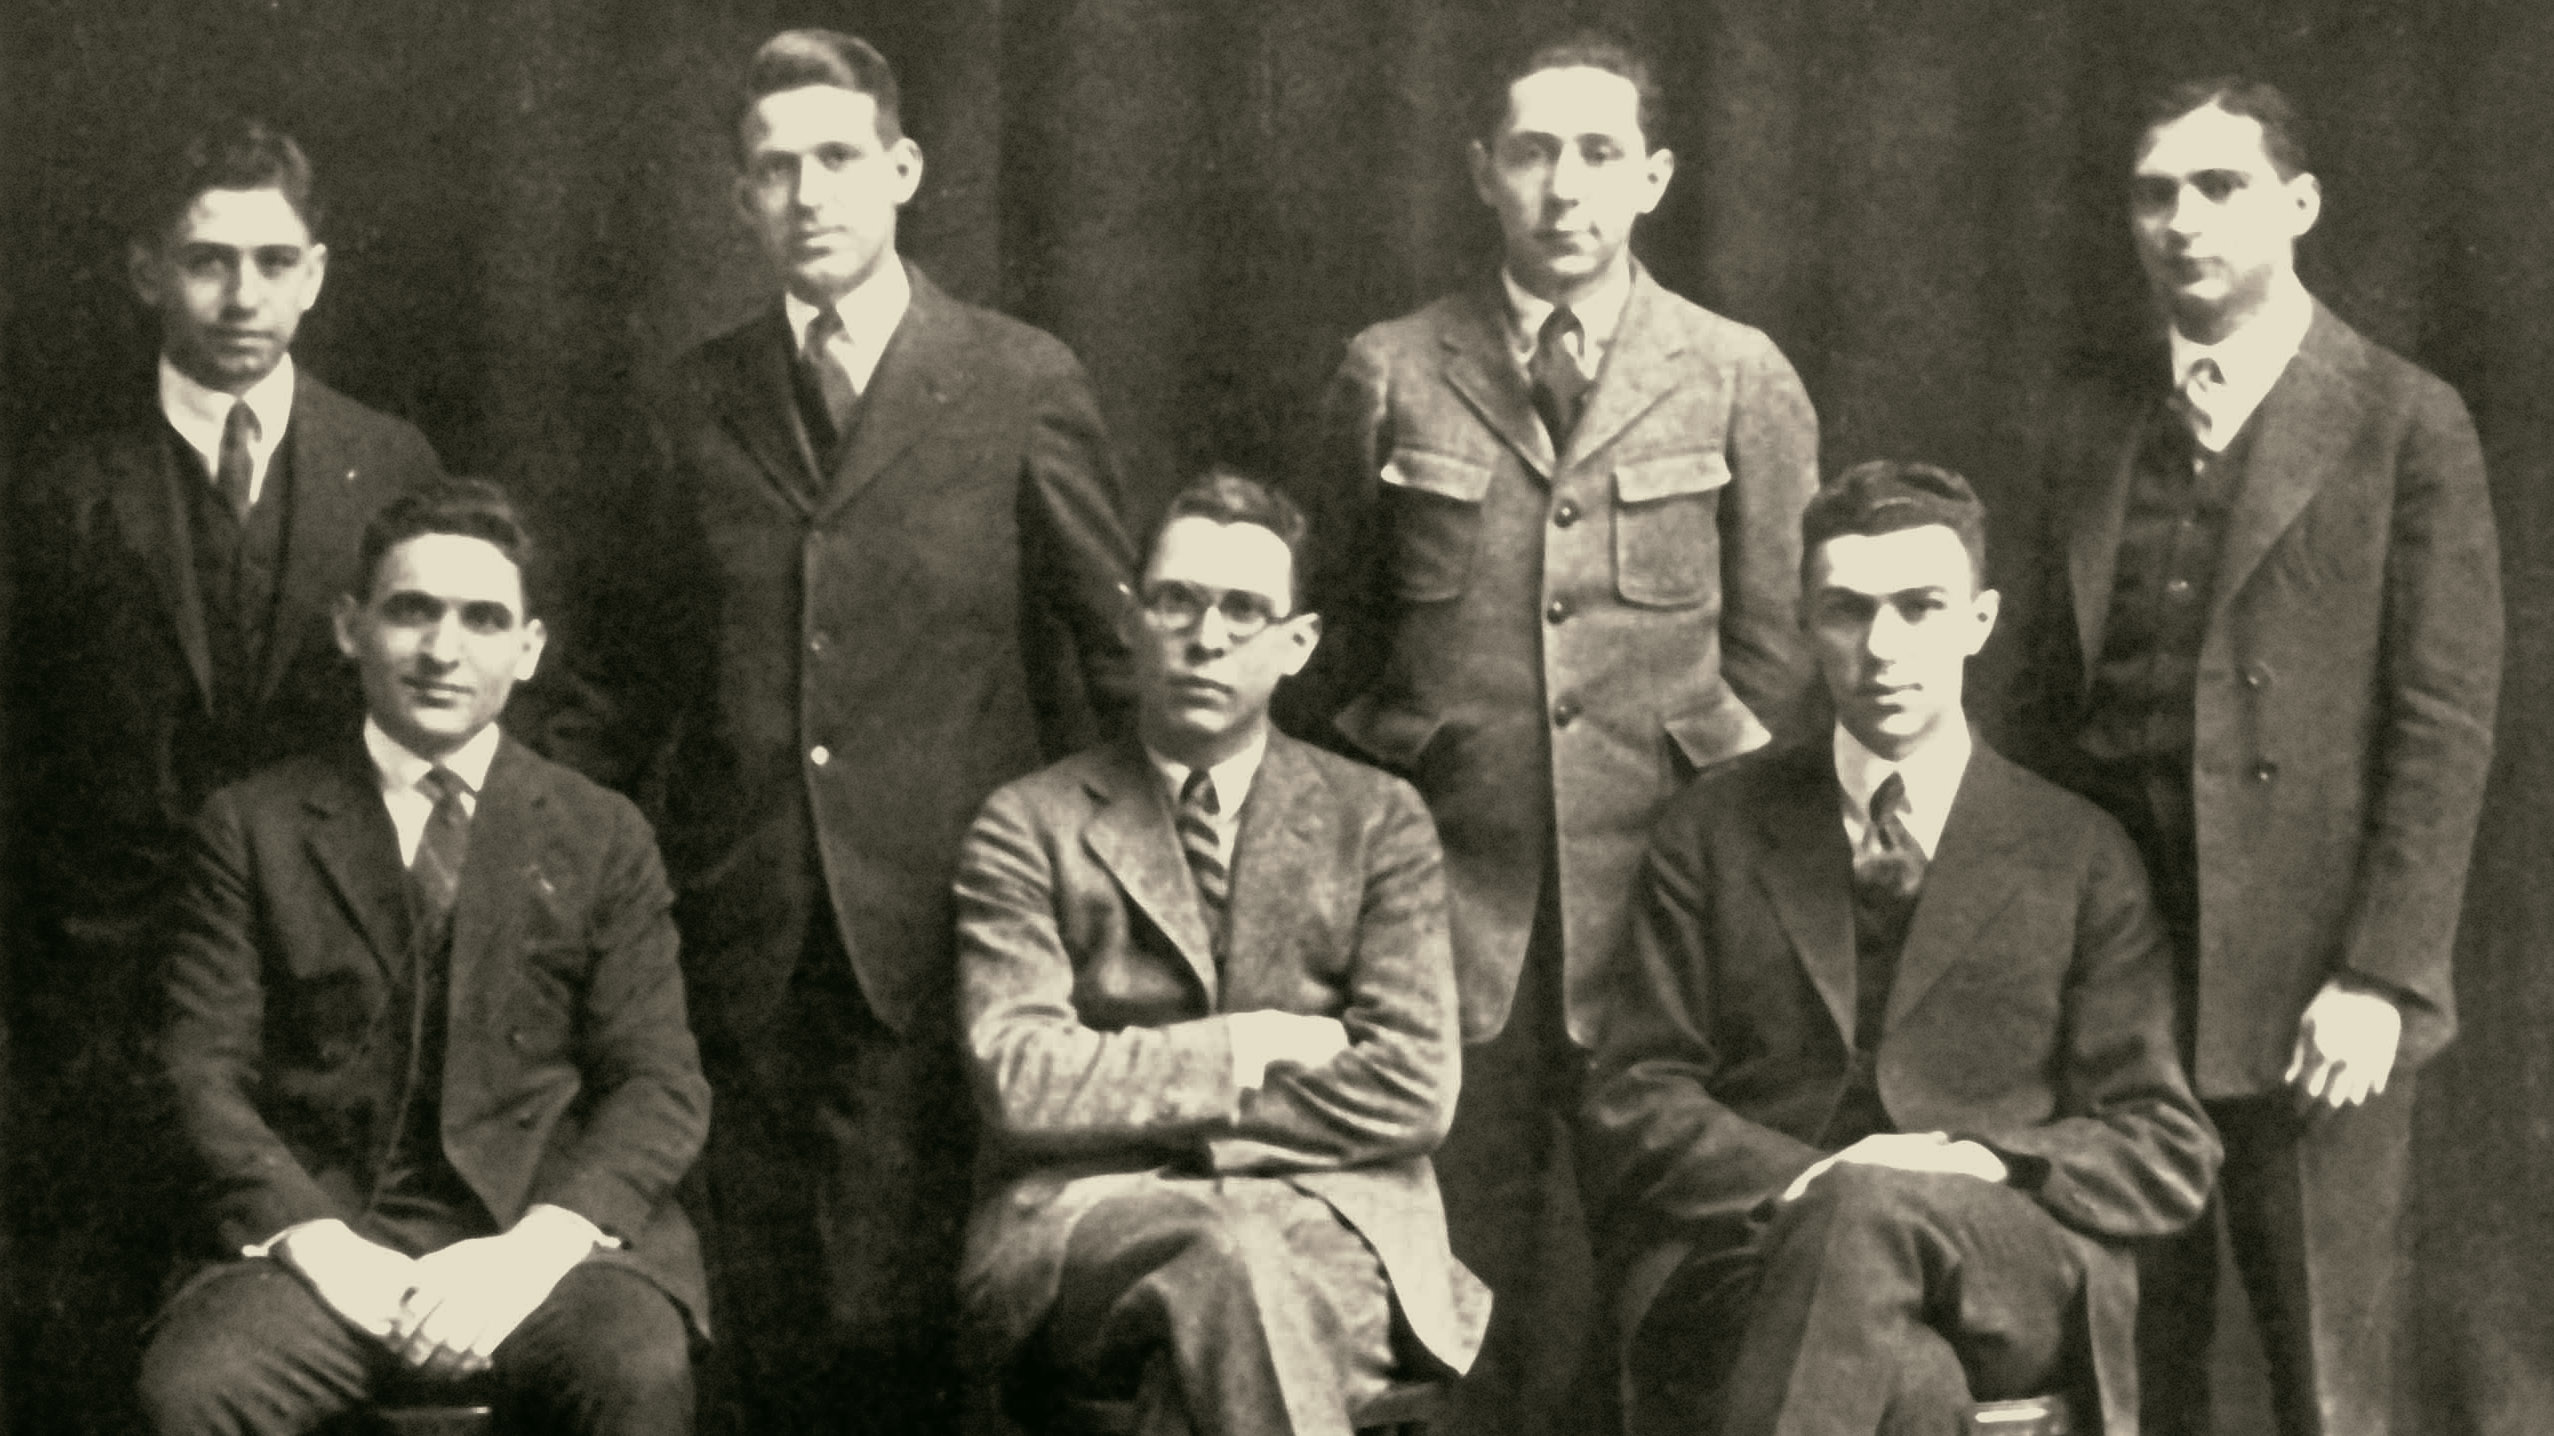 old black and white image of a group of seven men posed